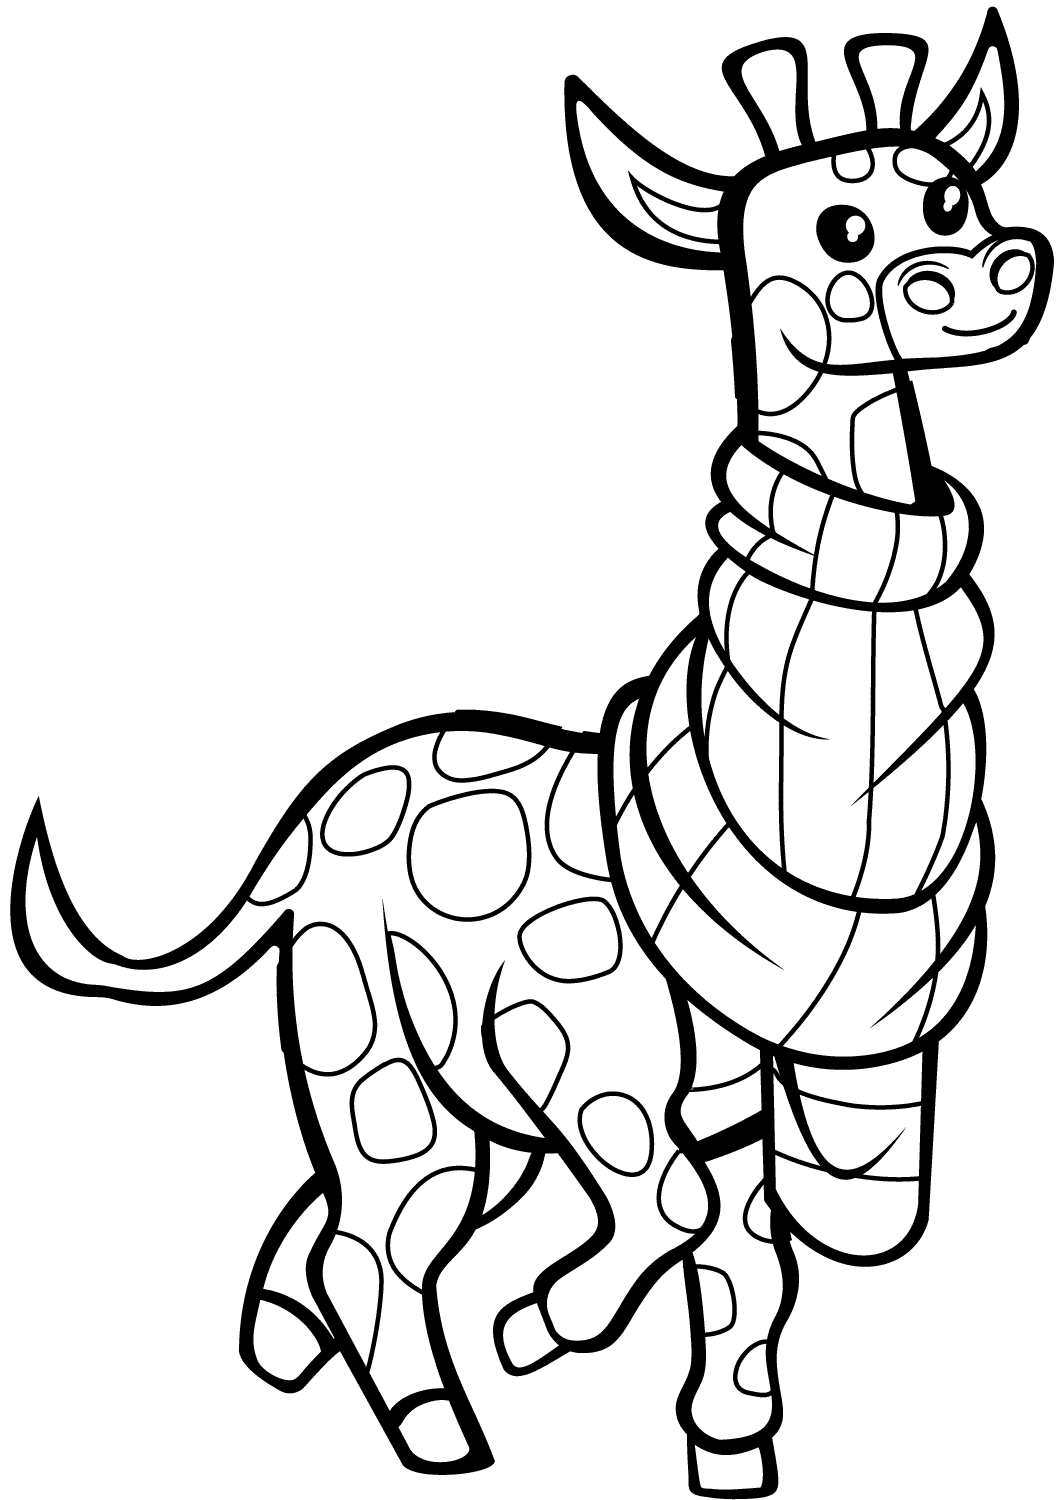 Giraffe with Scarf Coloring Page